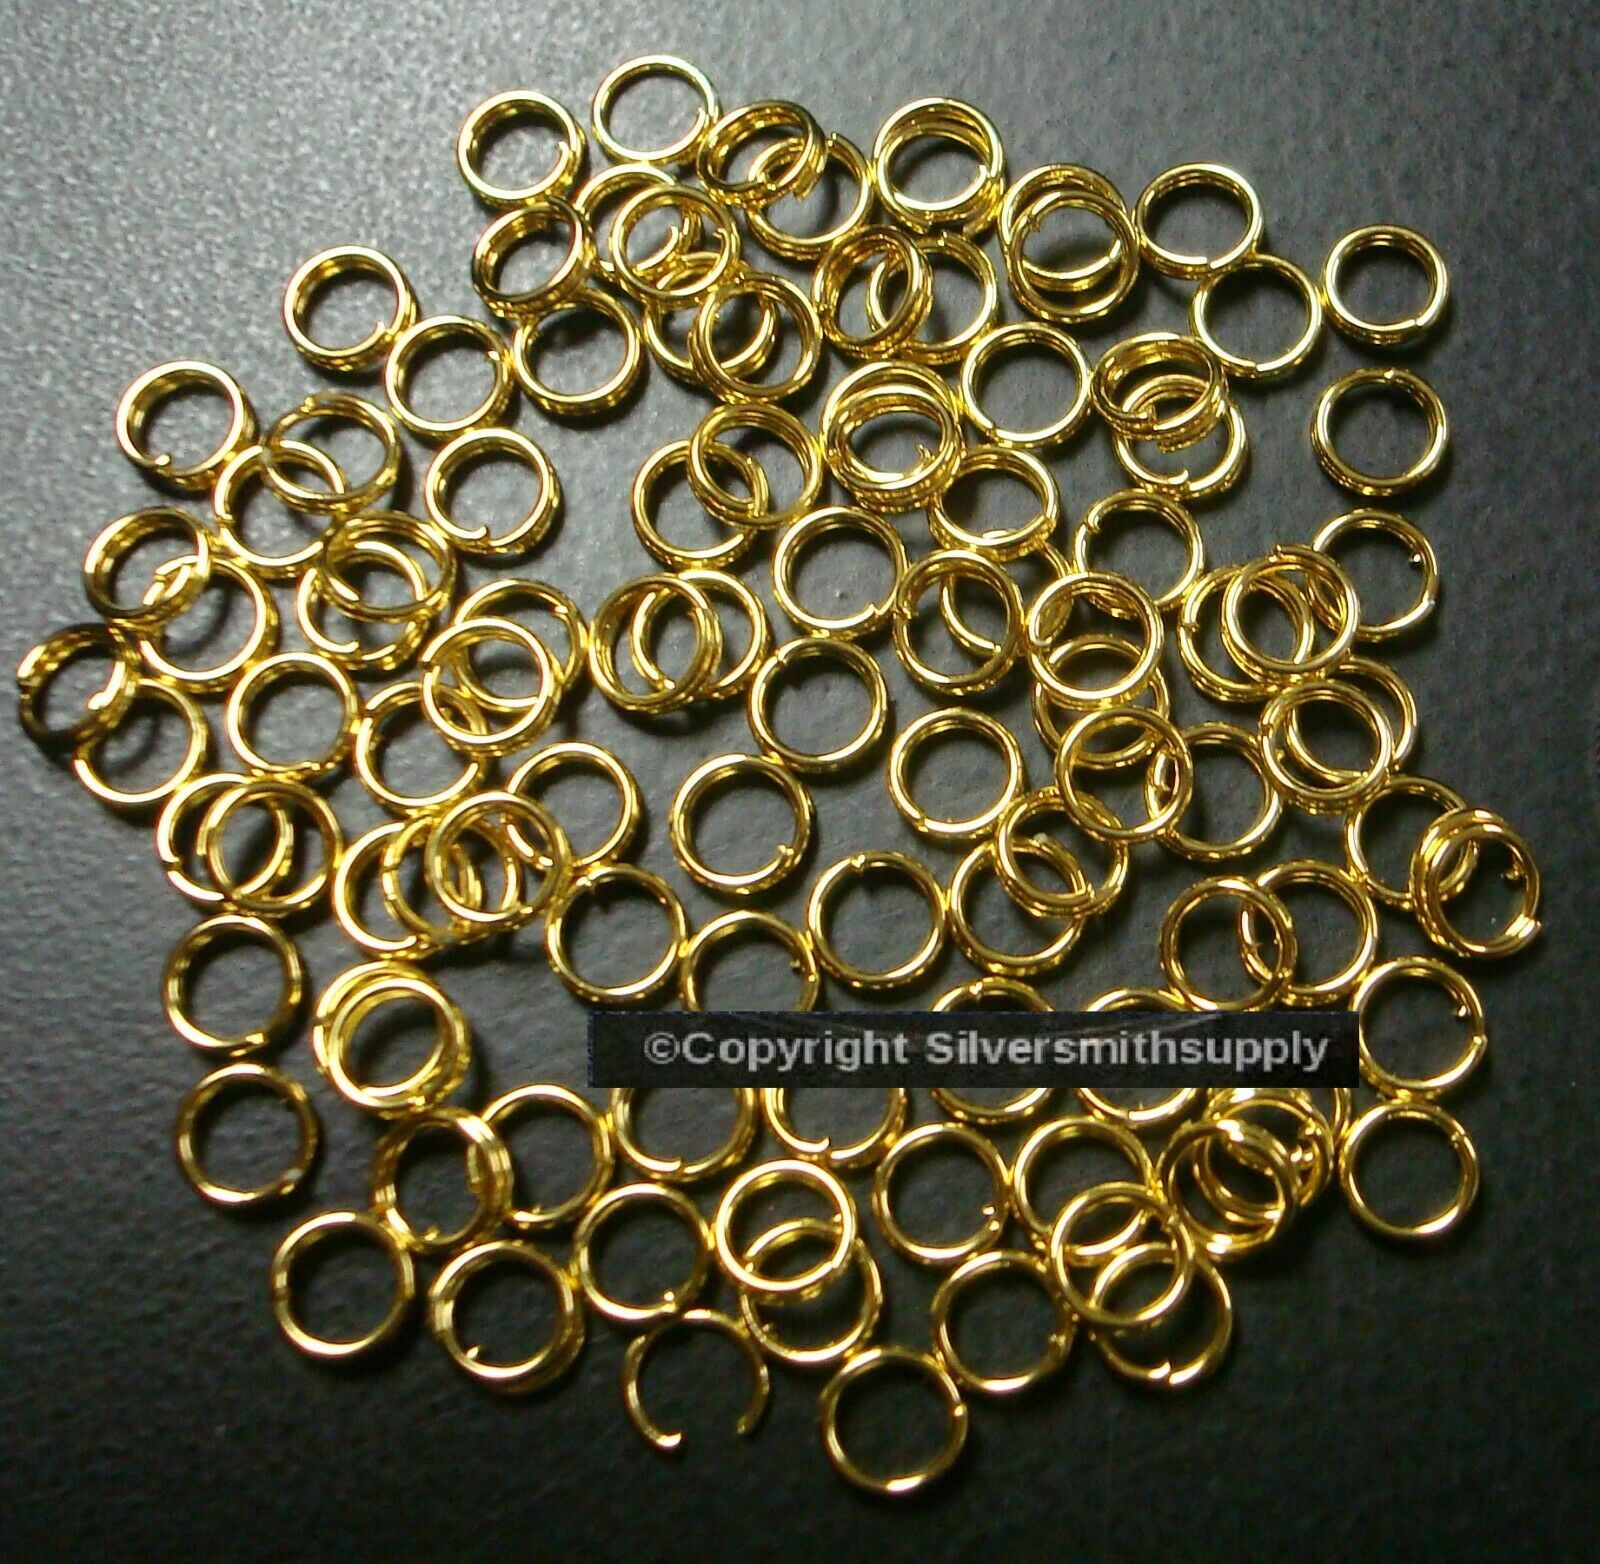 Silversmithsupply - 5mm gold plated split rings jump rings 100pcs beading bails charm attach fpc006c